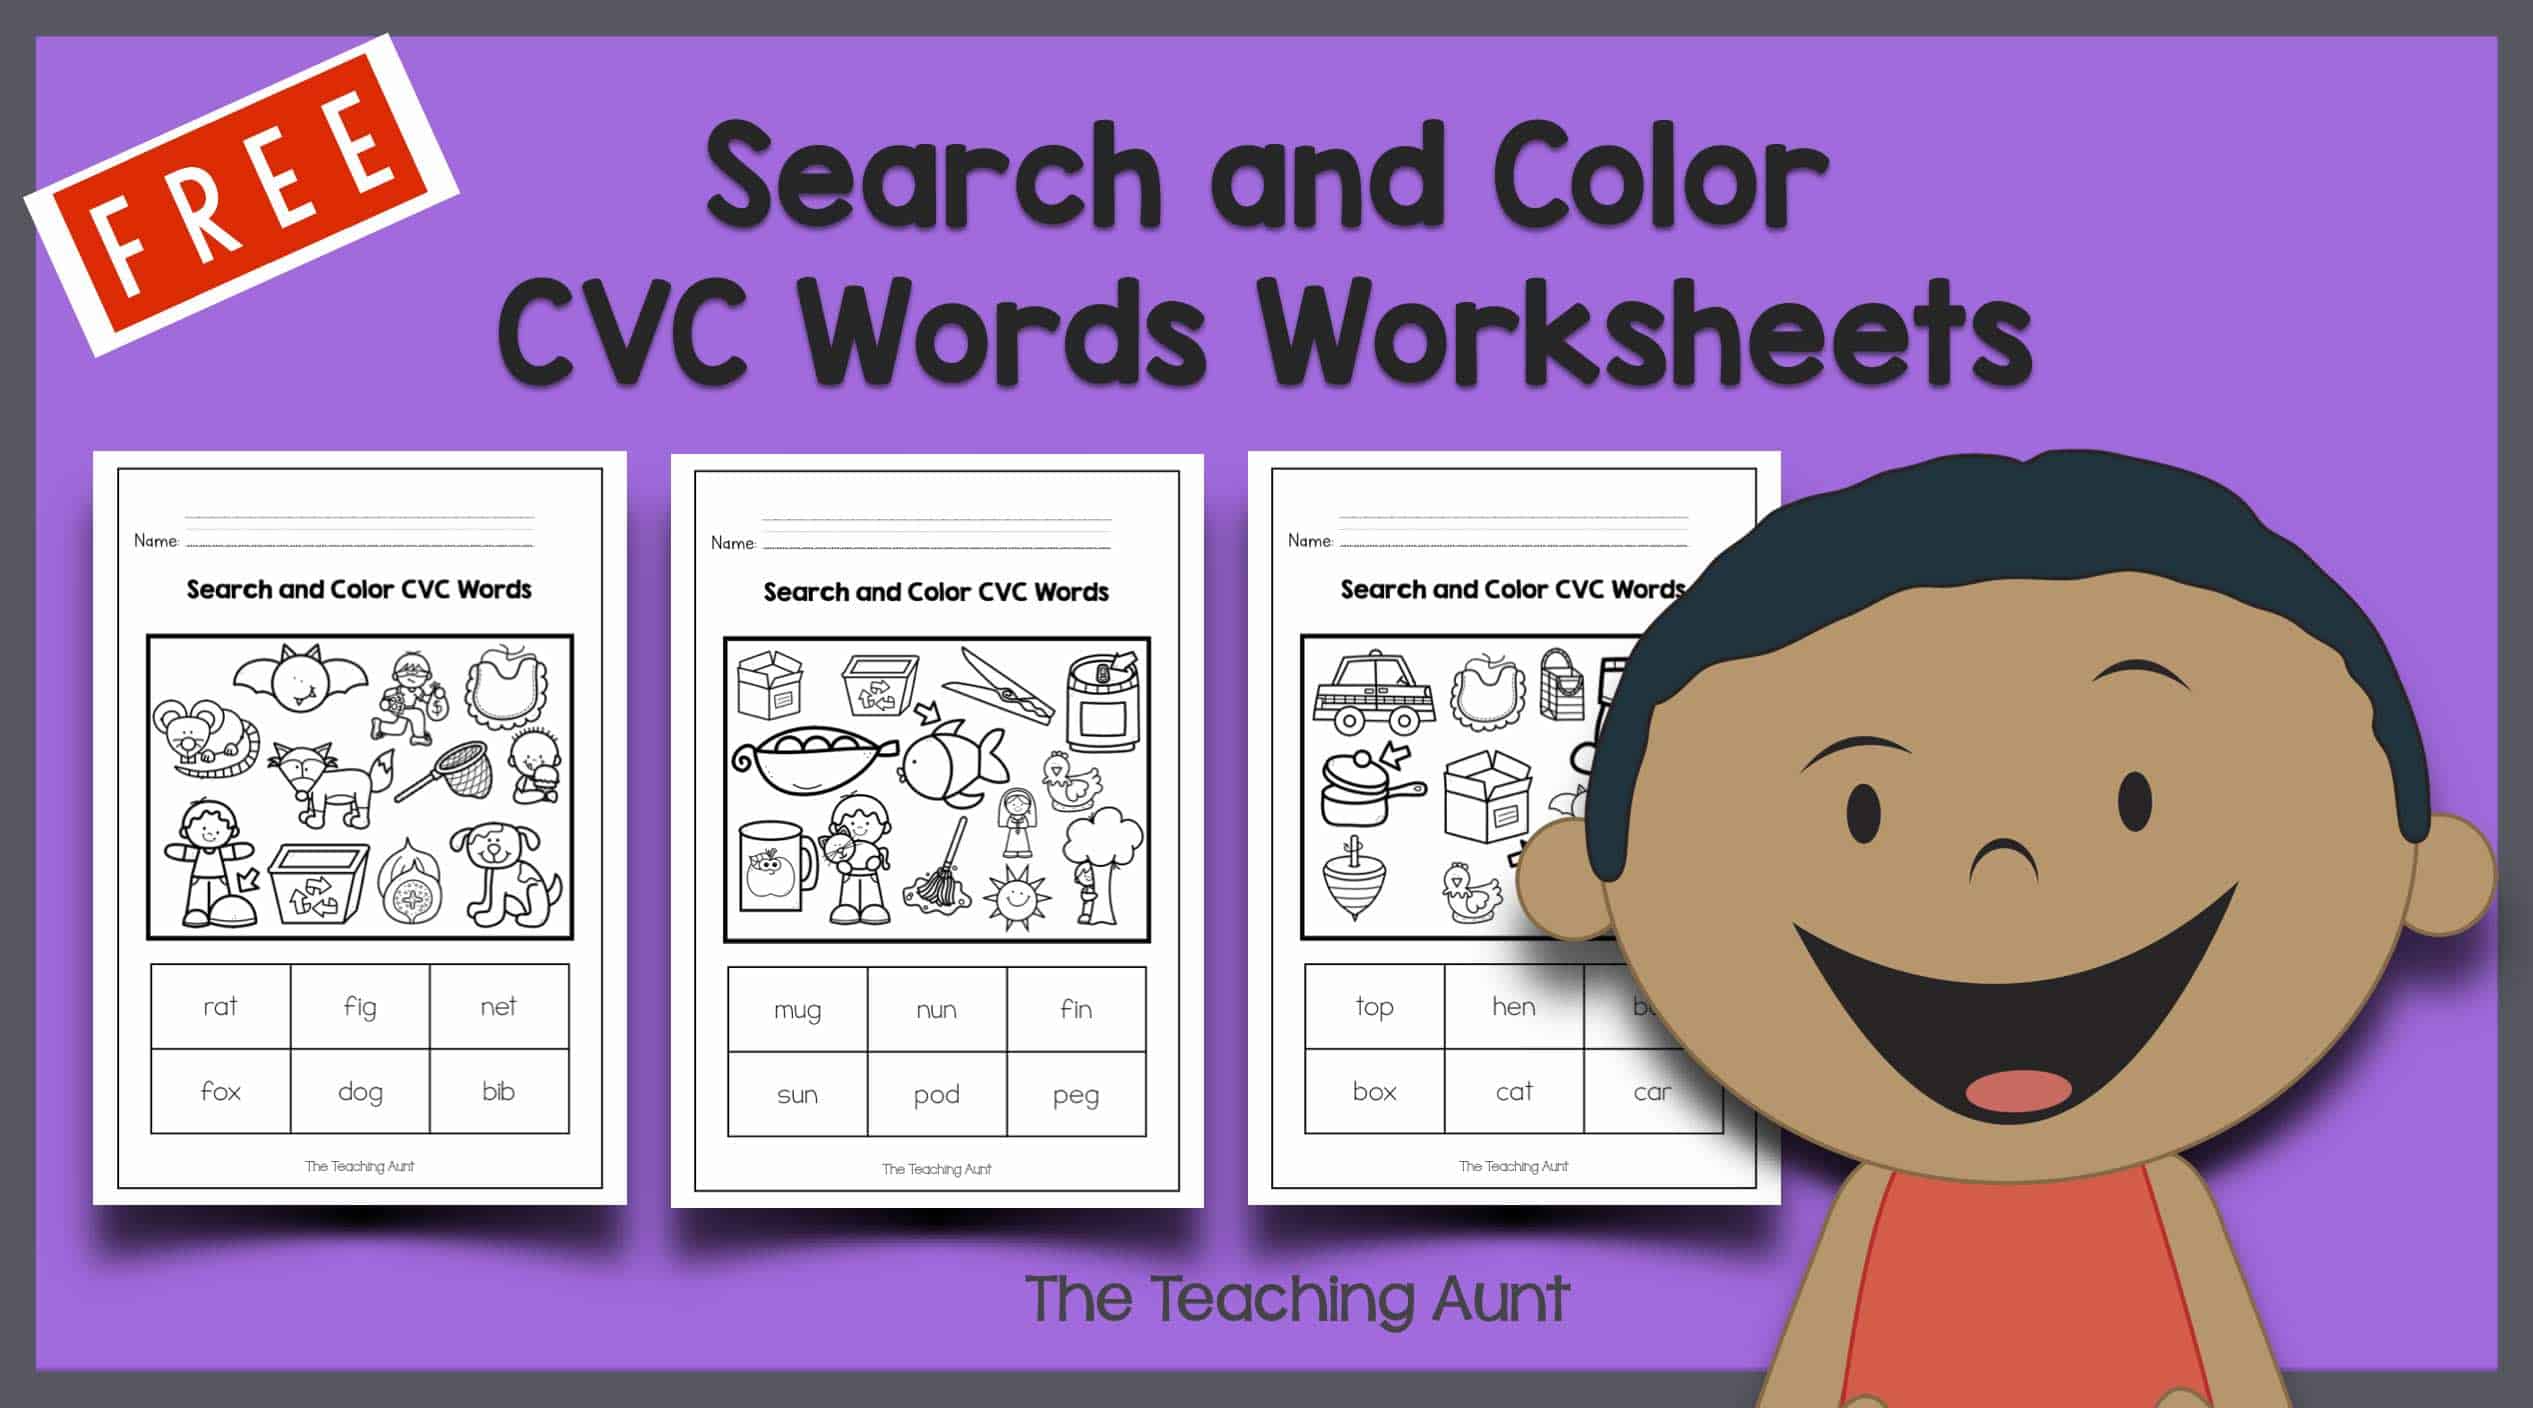 Search and Color CVC Words Worksheets